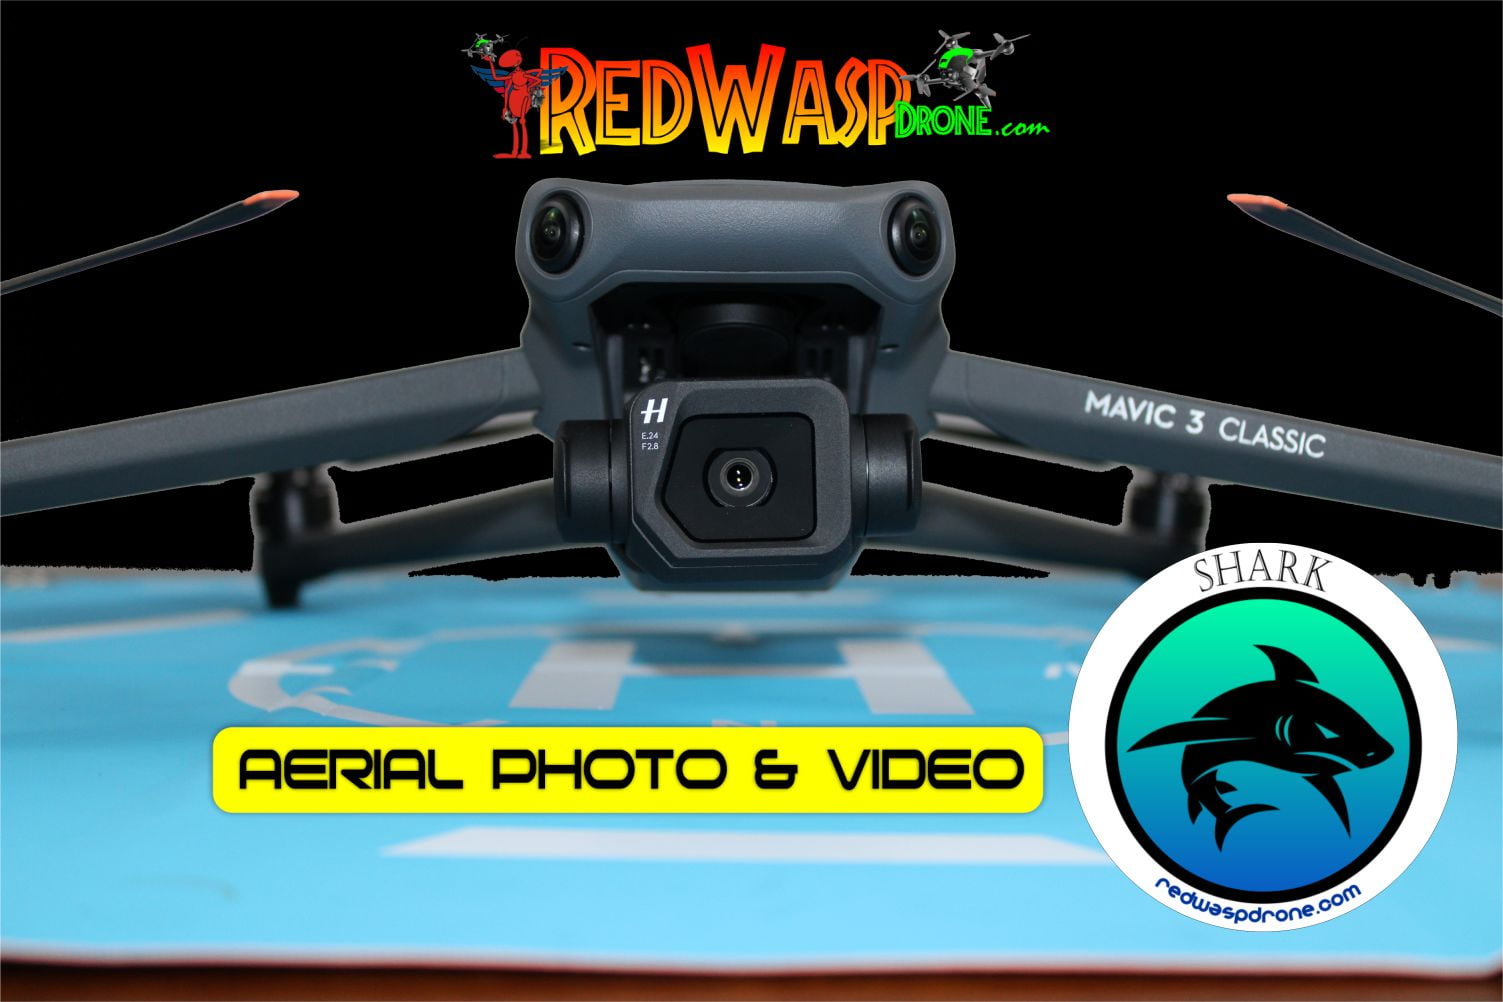 Drone Service, Drone Video, Drone Mapping, Drone Photography, Drone 4K Video Services, Drone Service in Pensacola, Drone Service in Milton, Drone Service in Pace, RedWasp Drone,